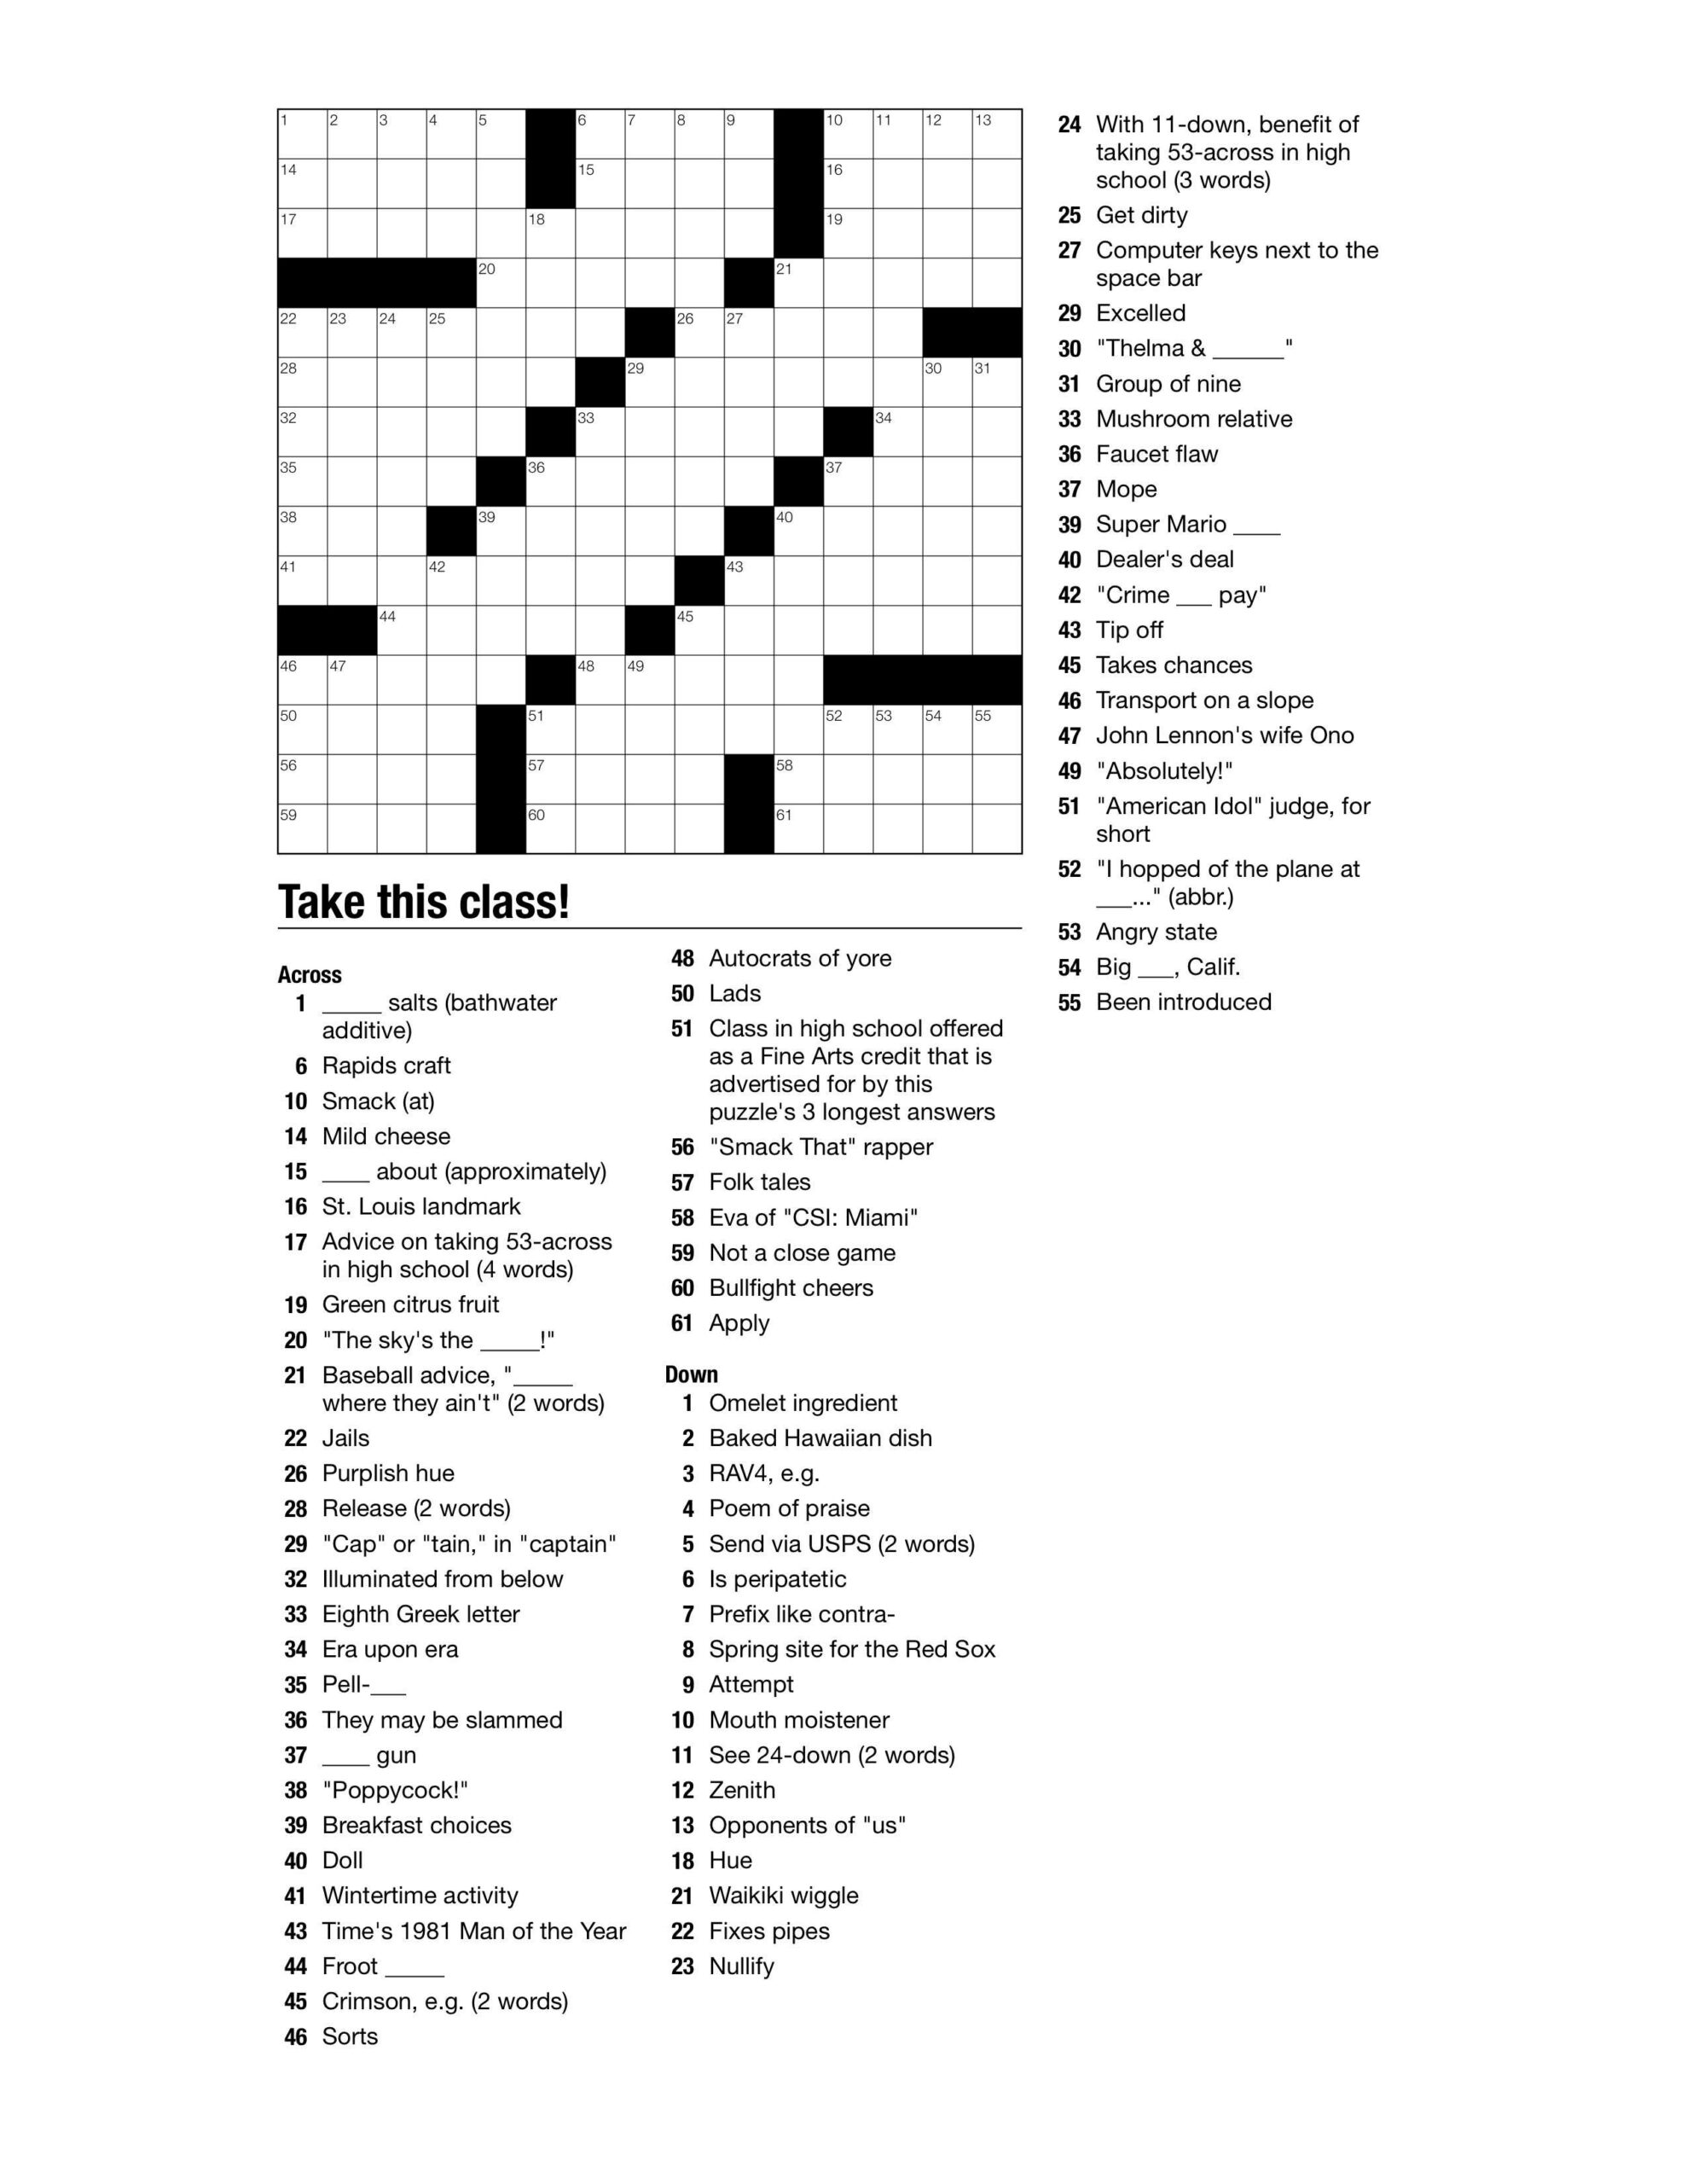 Weekly Themed Crossword Puzzle BVNWnews